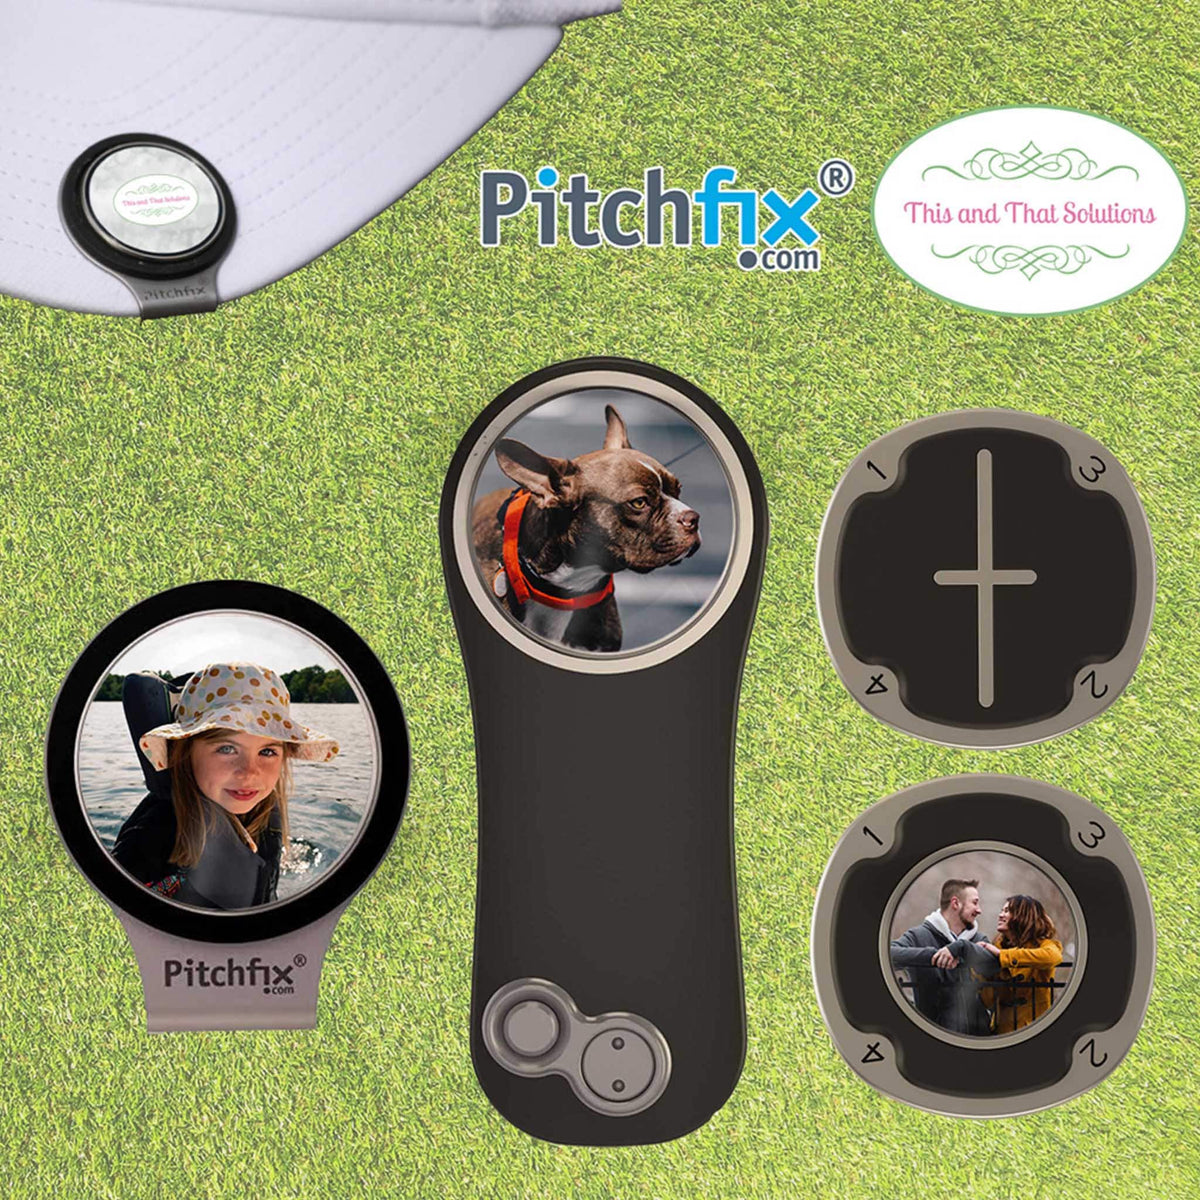 Personalized PitchFix Divot Tool | Golf Accessories | Golf Gifts | Company Logo